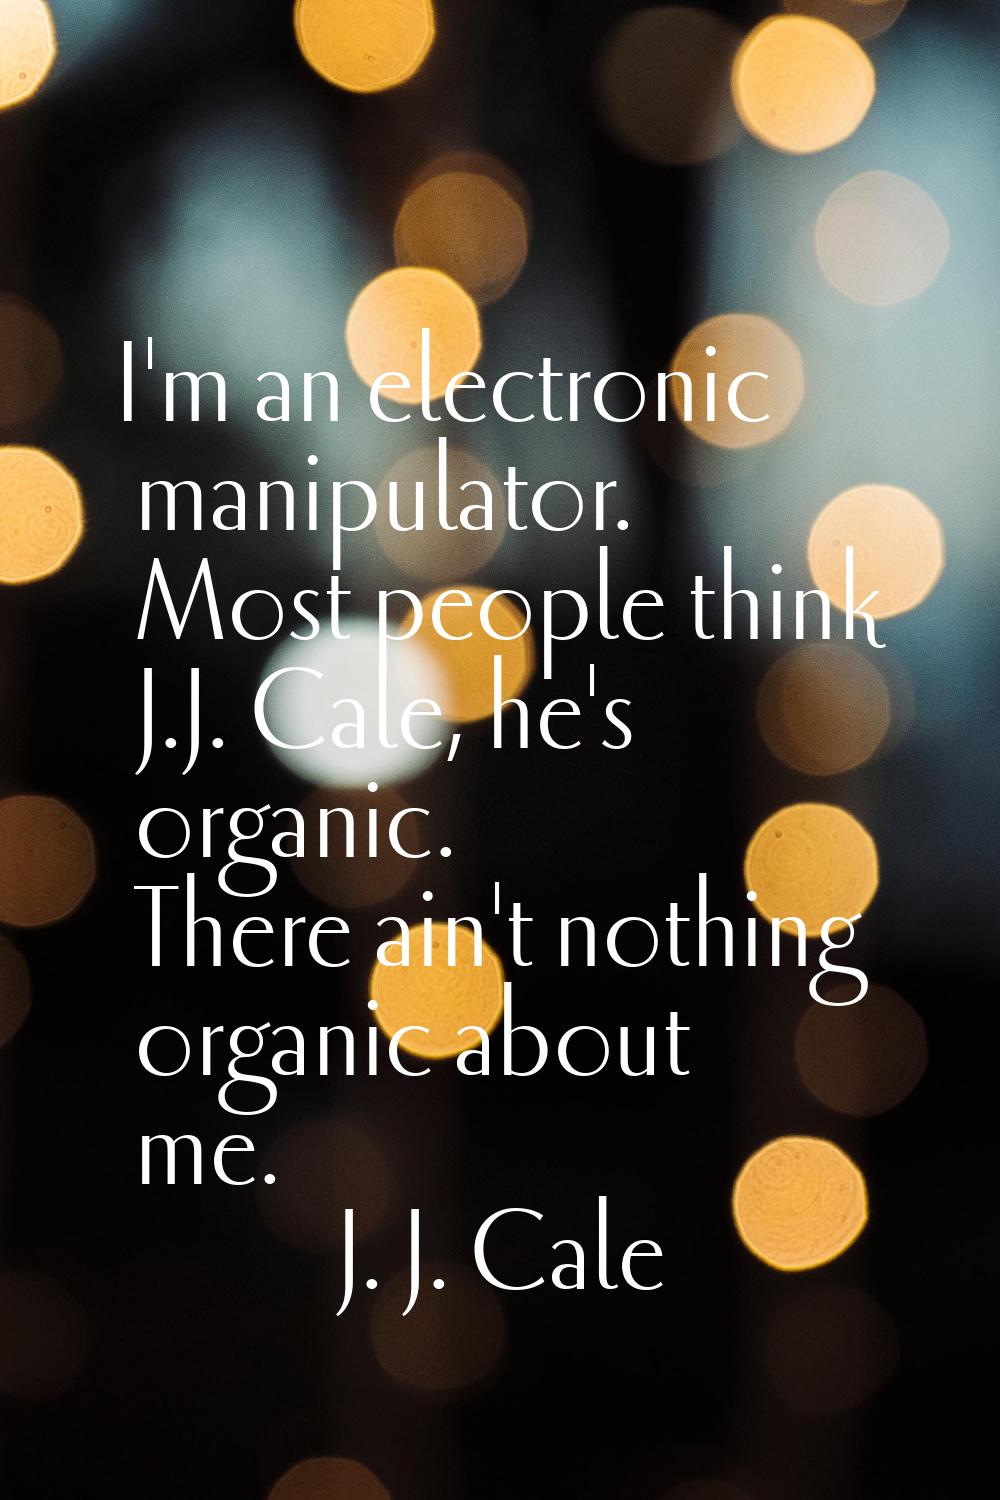 I'm an electronic manipulator. Most people think J.J. Cale, he's organic. There ain't nothing organ